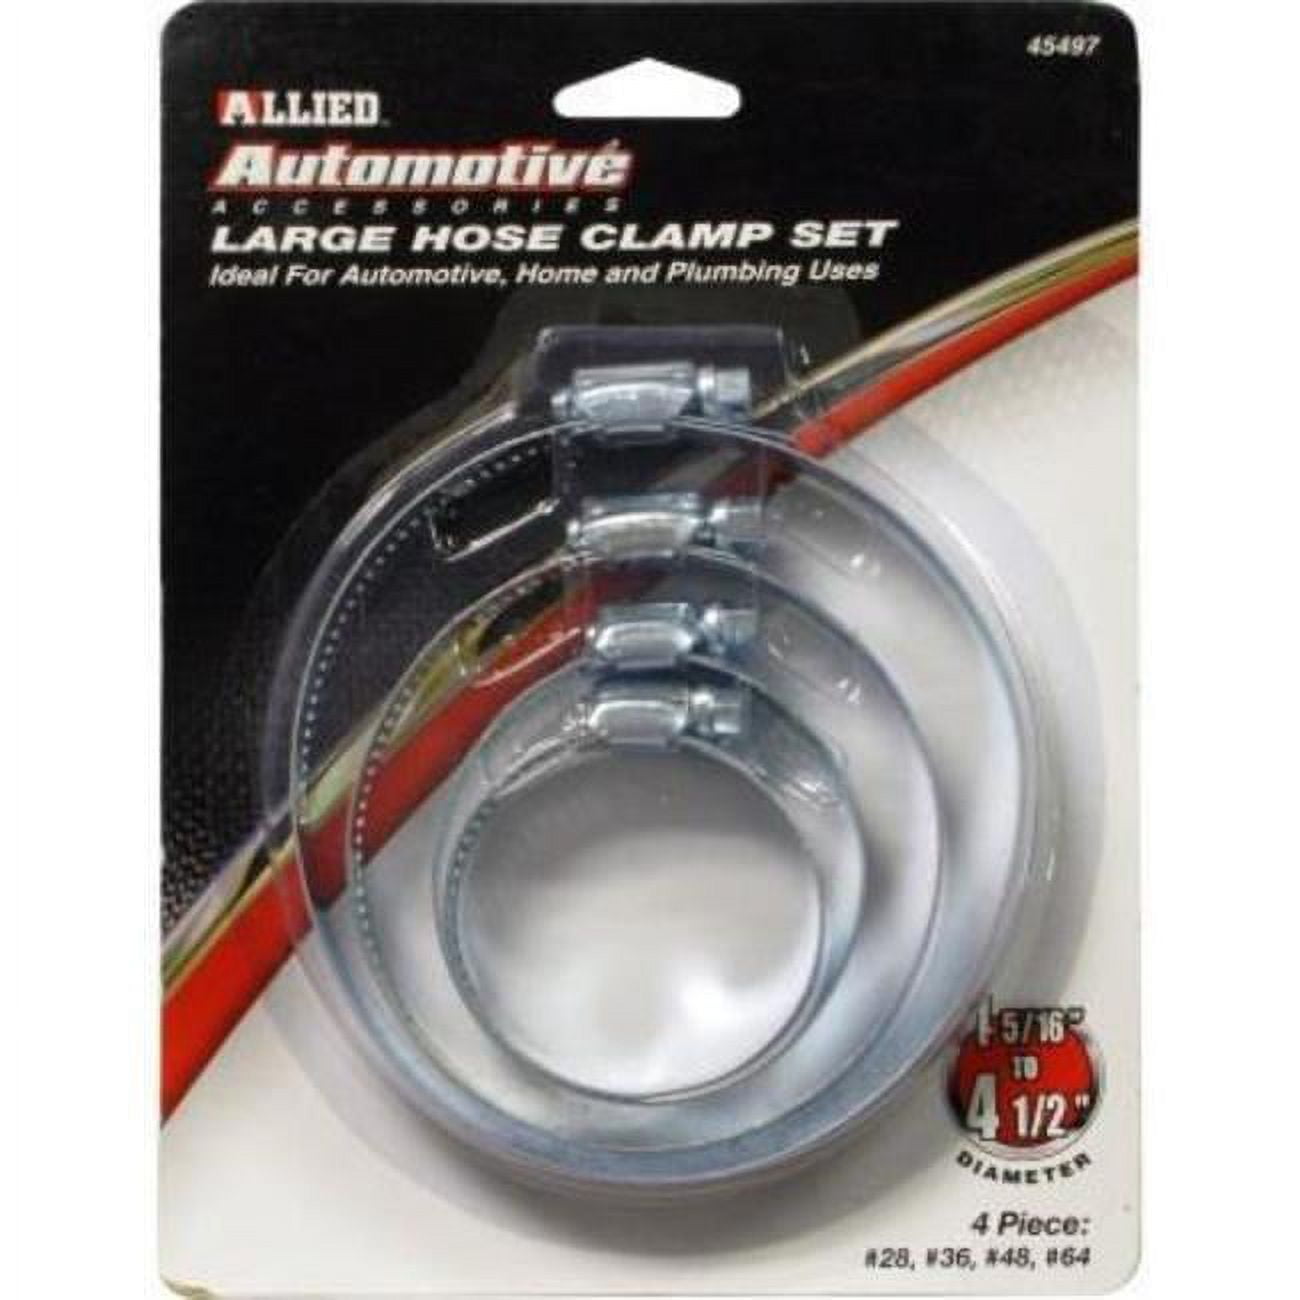 Picture of Allied 45497 Hose Clamp Set - 4 Piece